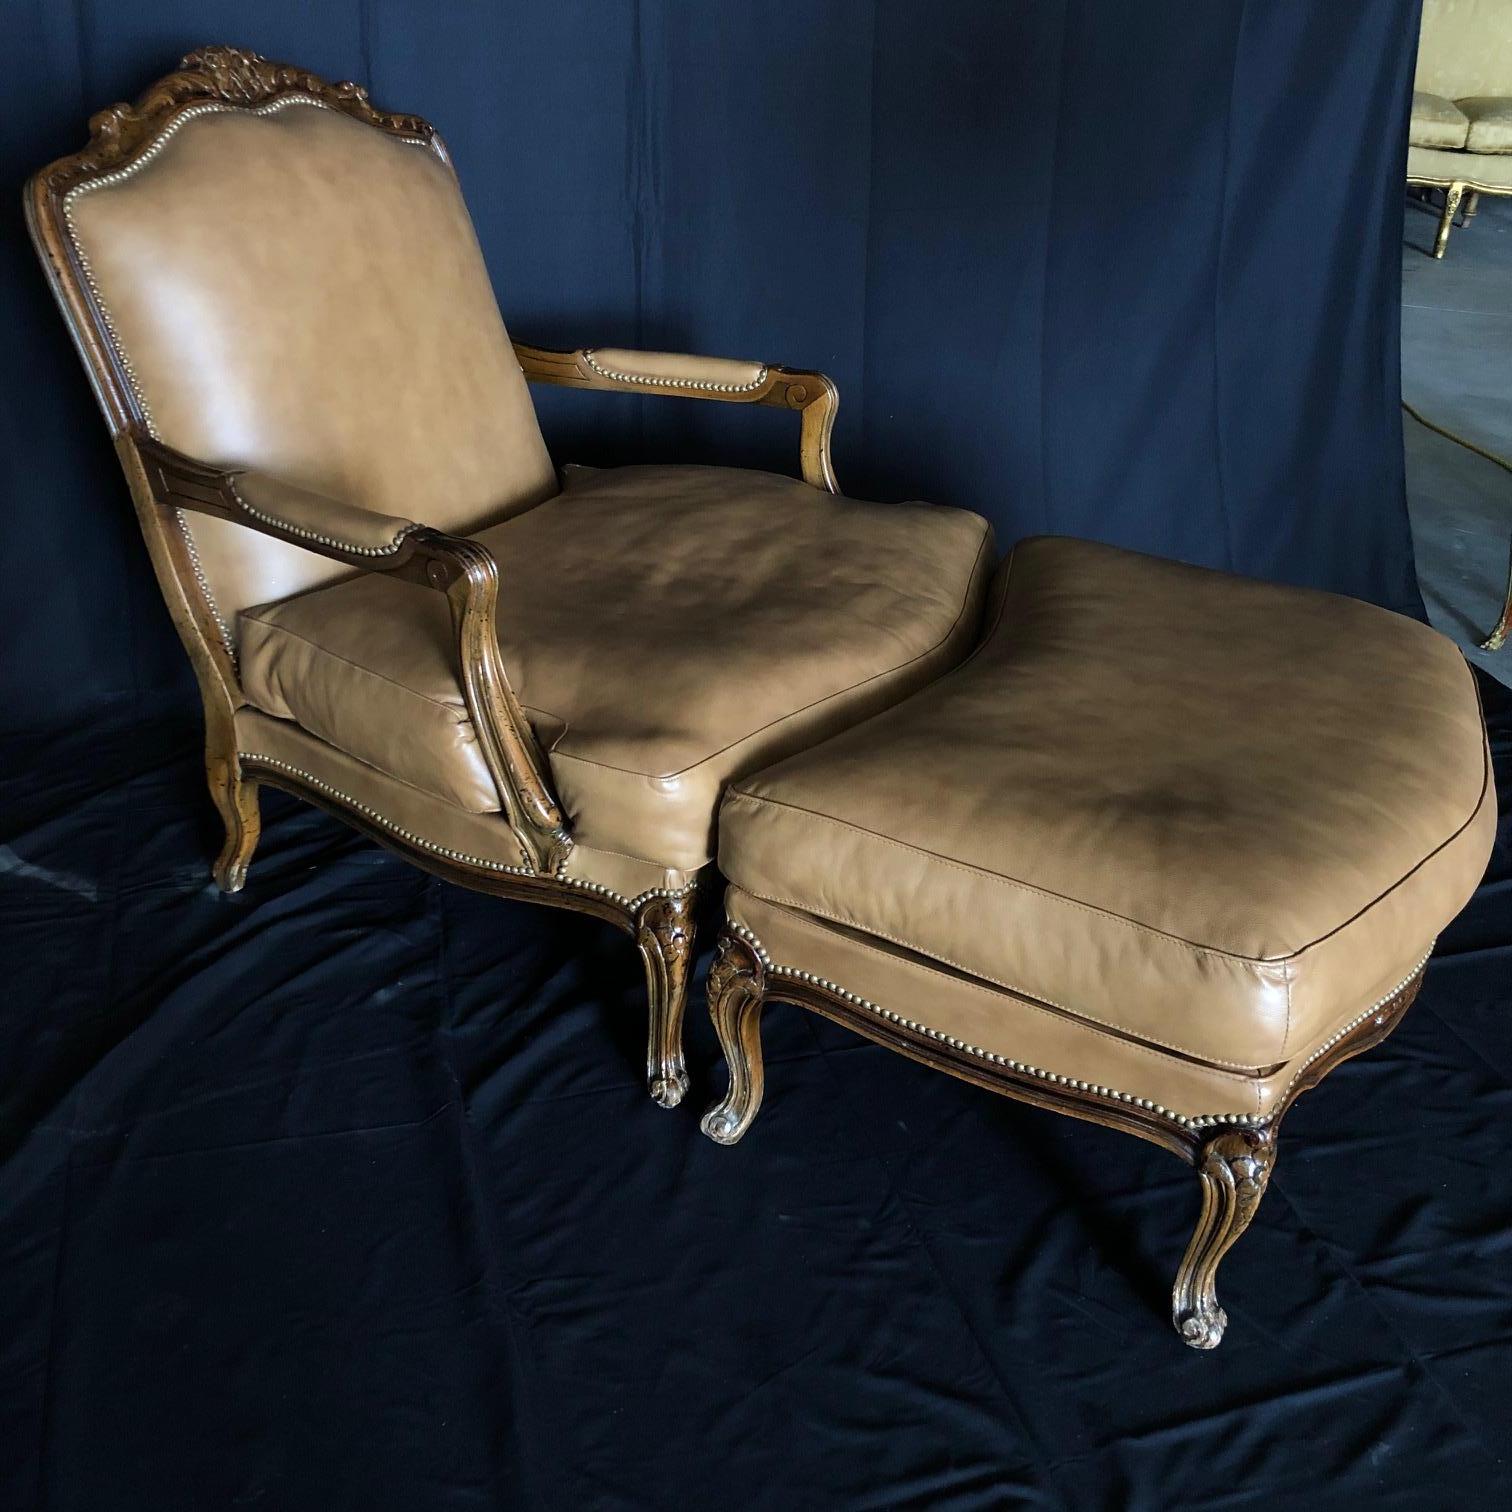 Distinguished Italian Louis XV style bergère chair and matching curved ottoman of generous proportions having a slightly slanted squared back, arched crest rail and rounded ears with straight, fluted, partially upholstered arms. Both have custom